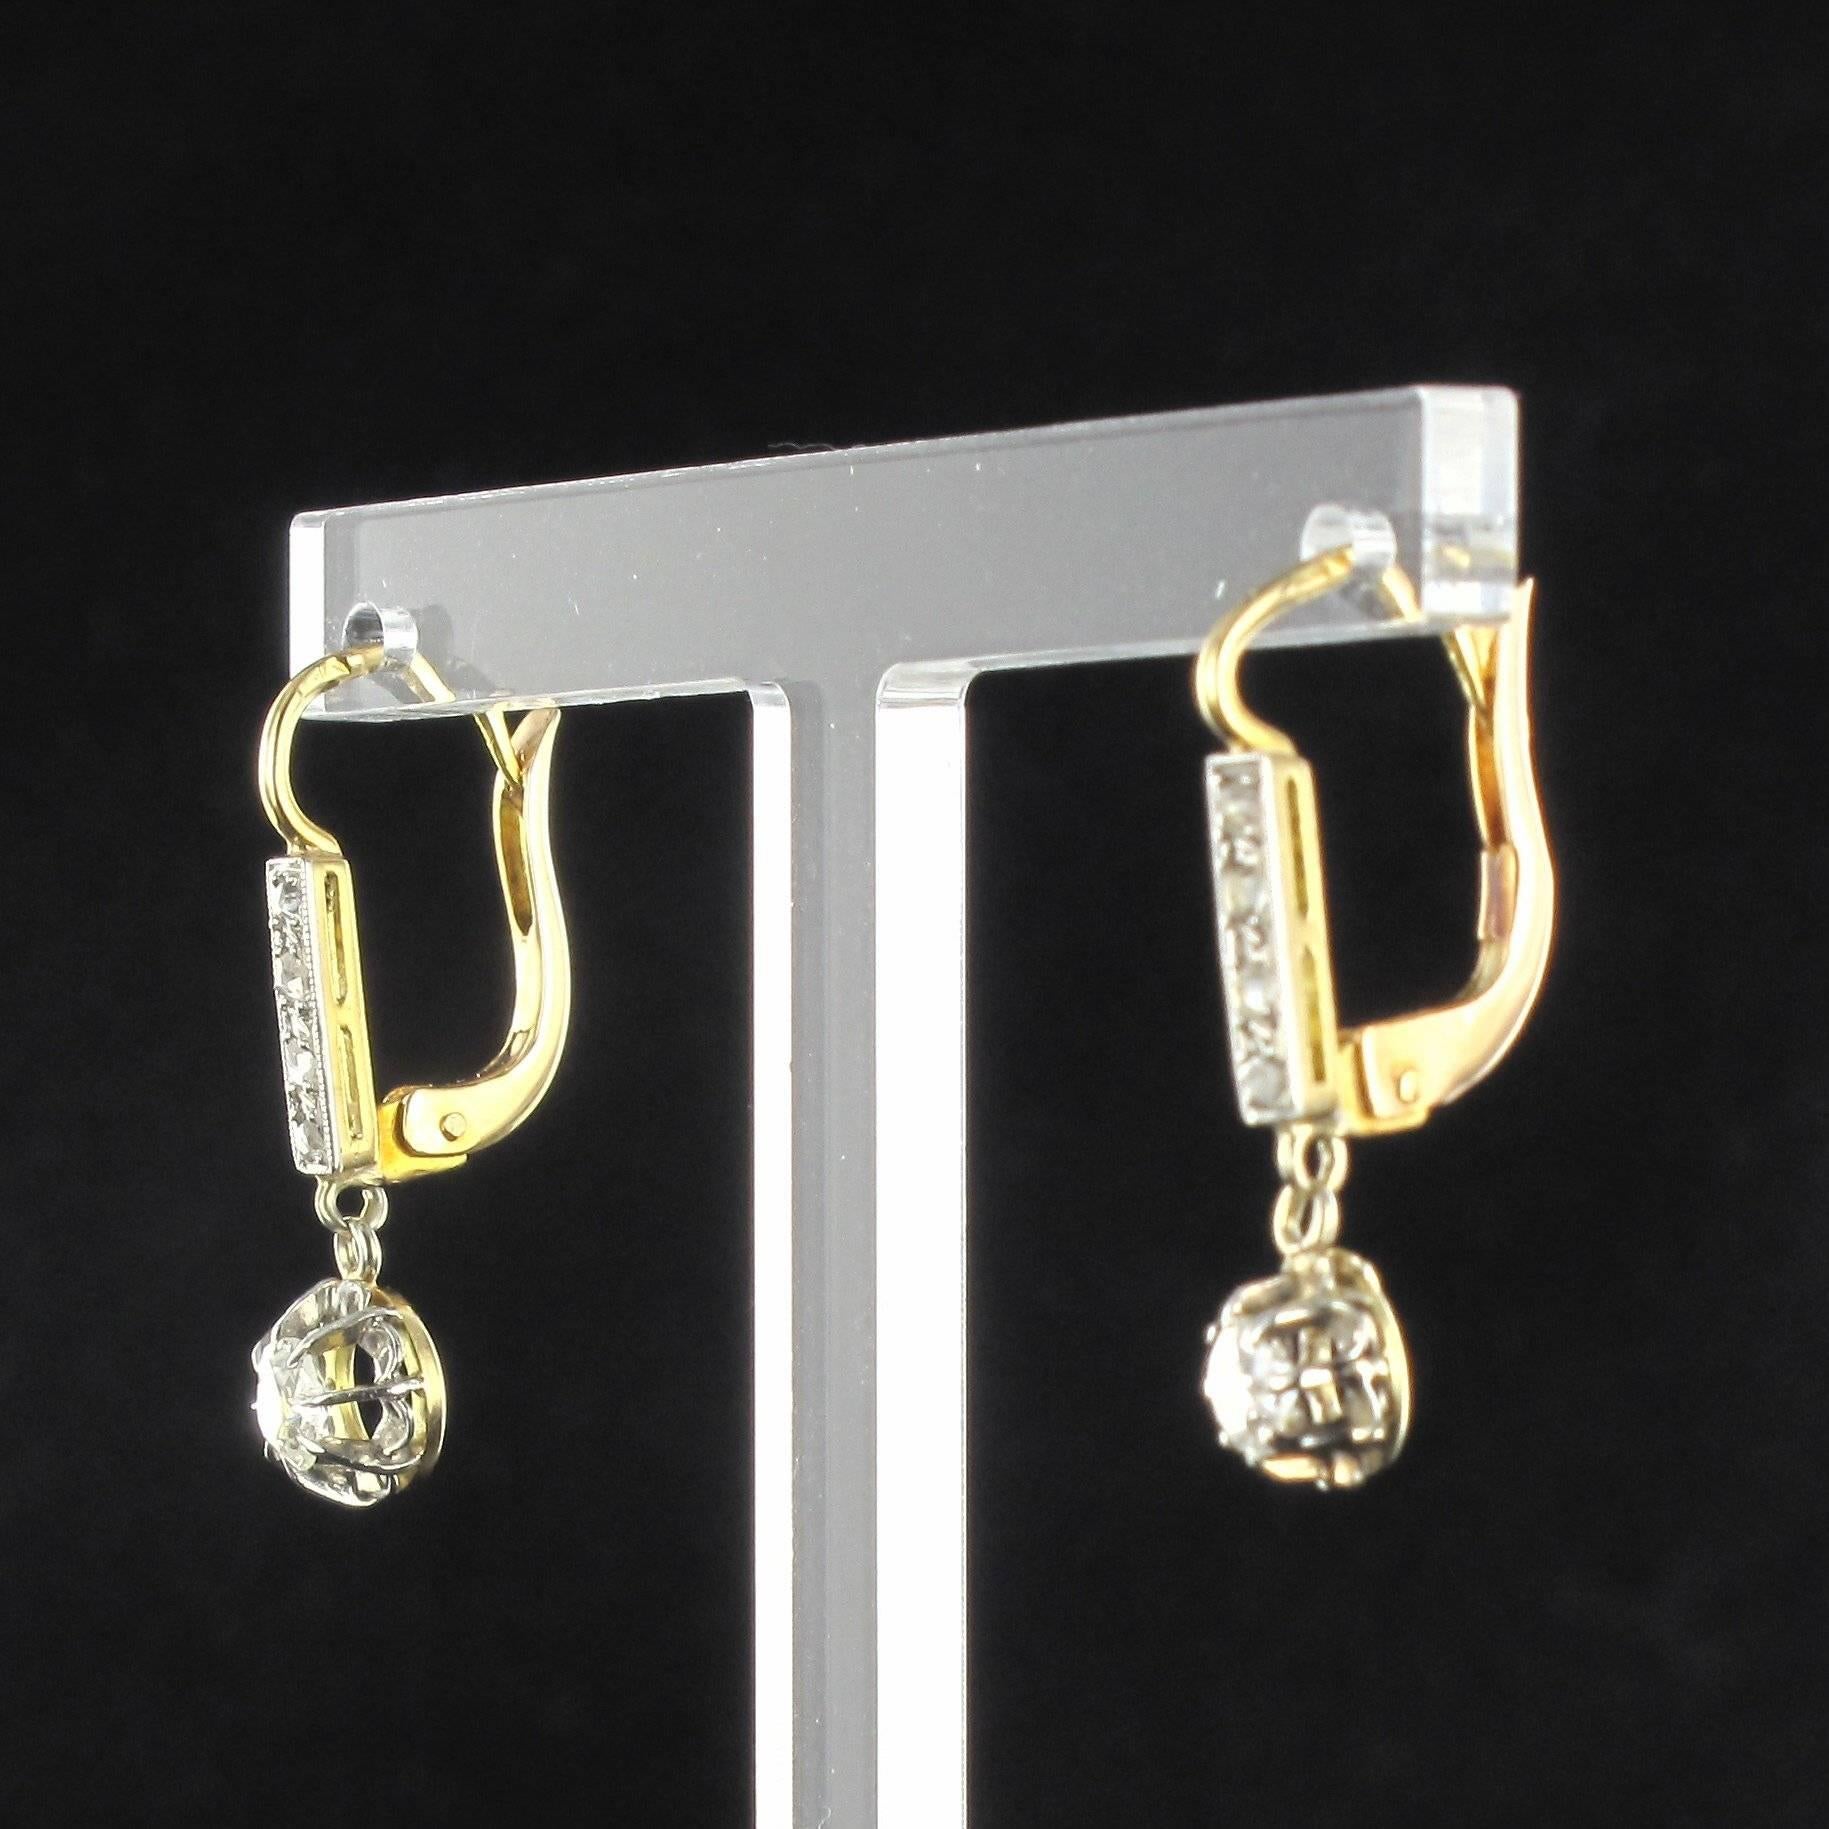 For pierced ears. 

Pair of earrings in platinium and 18 carat yellow gold, dog and eagle heads hallmarks. 

Each earring is composed of a column of 4 rose cut diamonds that holds a suspended antique brilliant cut diamond. These earrings open at